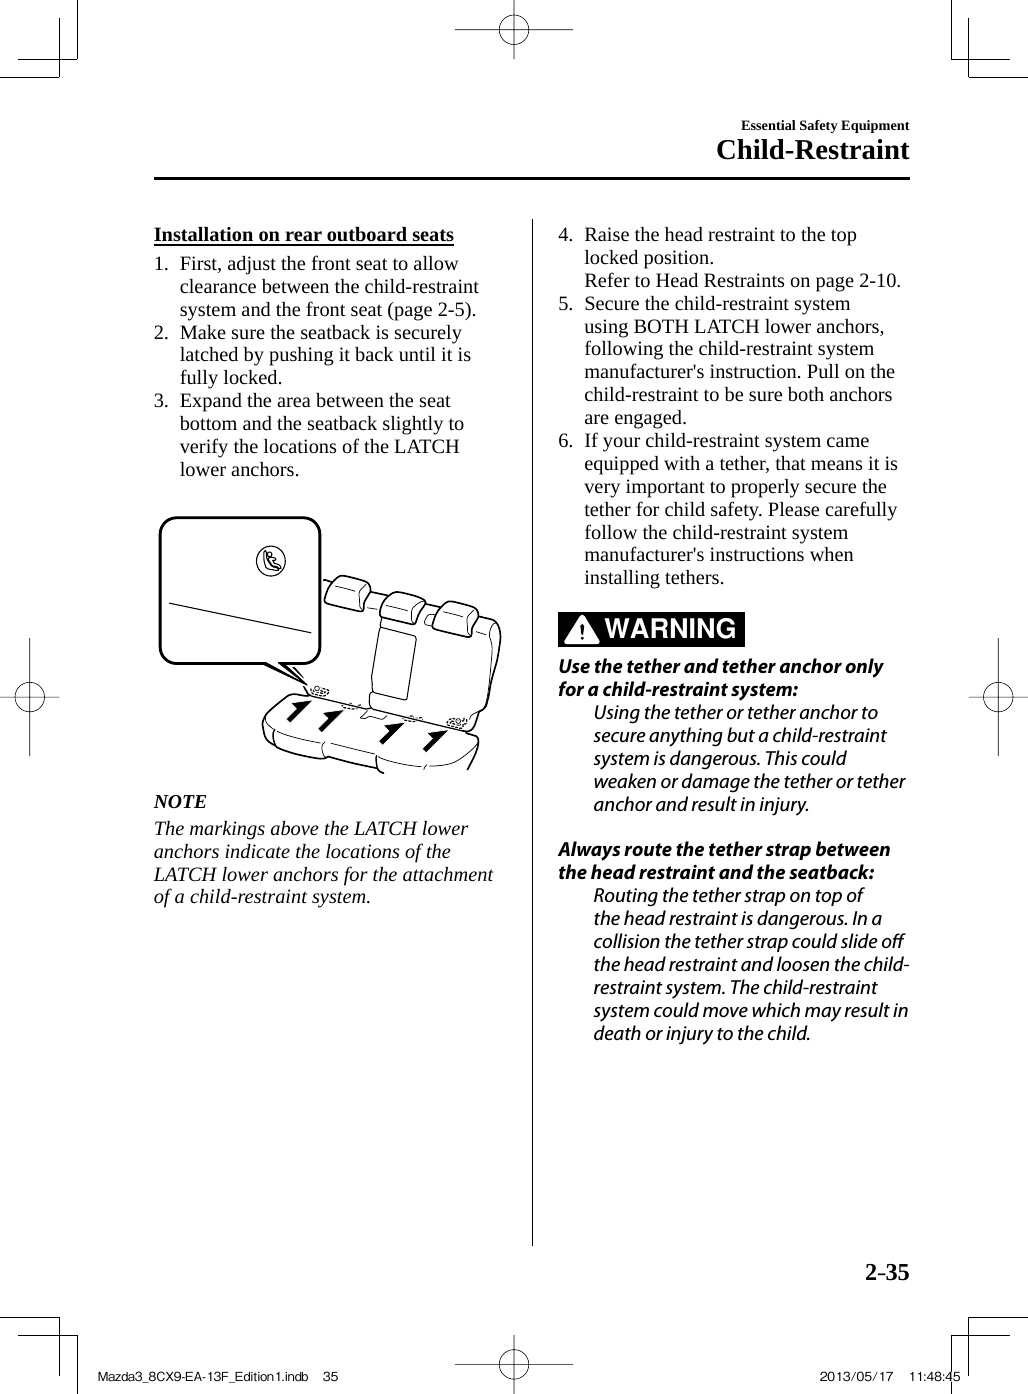 2–35Essential Safety EquipmentChild-Restraint    Installation  on  rear  outboard  seats     1.   First,  adjust  the  front  seat  to  allow clearance between the child-restraint system and the front seat (page  2-5 ).   2.   Make sure the seatback is securely latched by pushing it back until it is fully locked.   3.   Expand the area between the seat bottom and the seatback slightly to verify the locations of the LATCH lower anchors.        NOTE  The markings above the LATCH lower anchors indicate the locations of the LATCH lower anchors for the attachment of a child-restraint system.      4.   Raise the head restraint to the top locked position.   Refer to Head Restraints on page  2-10 .  5.   Secure  the  child-restraint  system using BOTH LATCH lower anchors, following the child-restraint system manufacturer&apos;s instruction. Pull on the child-restraint to be sure both anchors are engaged.   6.   If  your  child-restraint  system  came equipped with a tether, that means it is very important to properly secure the tether for child safety. Please carefully follow the child-restraint system manufacturer&apos;s instructions when installing tethers.       WARNING     Use the tether and tether anchor only for a child-restraint system:  Using the tether or tether anchor to secure anything but a child-restraint system is dangerous. This could weaken or damage the tether or tether anchor and result in injury.    Always route the tether strap between the head restraint and the seatback:  Routing the tether strap on top of the head restraint is dangerous. In a collision the tether strap could slide o  the head restraint and loosen the child-restraint system. The child-restraint system could move which may result in death or injury to the child.Mazda3_8CX9-EA-13F_Edition1.indb   35Mazda3_8CX9-EA-13F_Edition1.indb   35 2013/05/17   11:48:452013/05/17   11:48:45